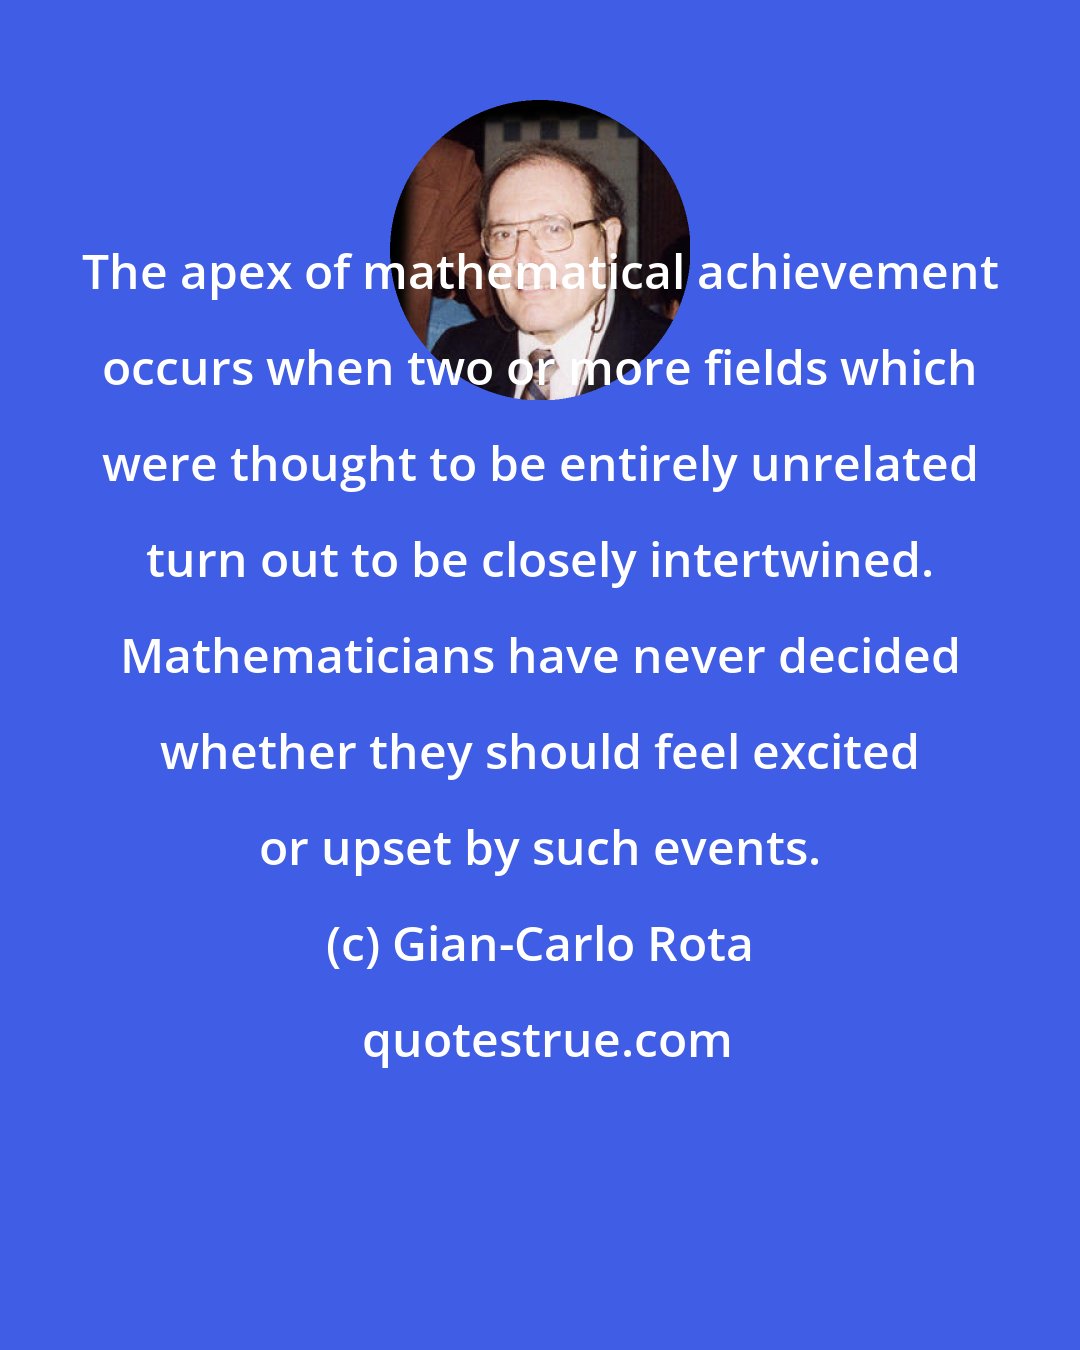 Gian-Carlo Rota: The apex of mathematical achievement occurs when two or more fields which were thought to be entirely unrelated turn out to be closely intertwined. Mathematicians have never decided whether they should feel excited or upset by such events.